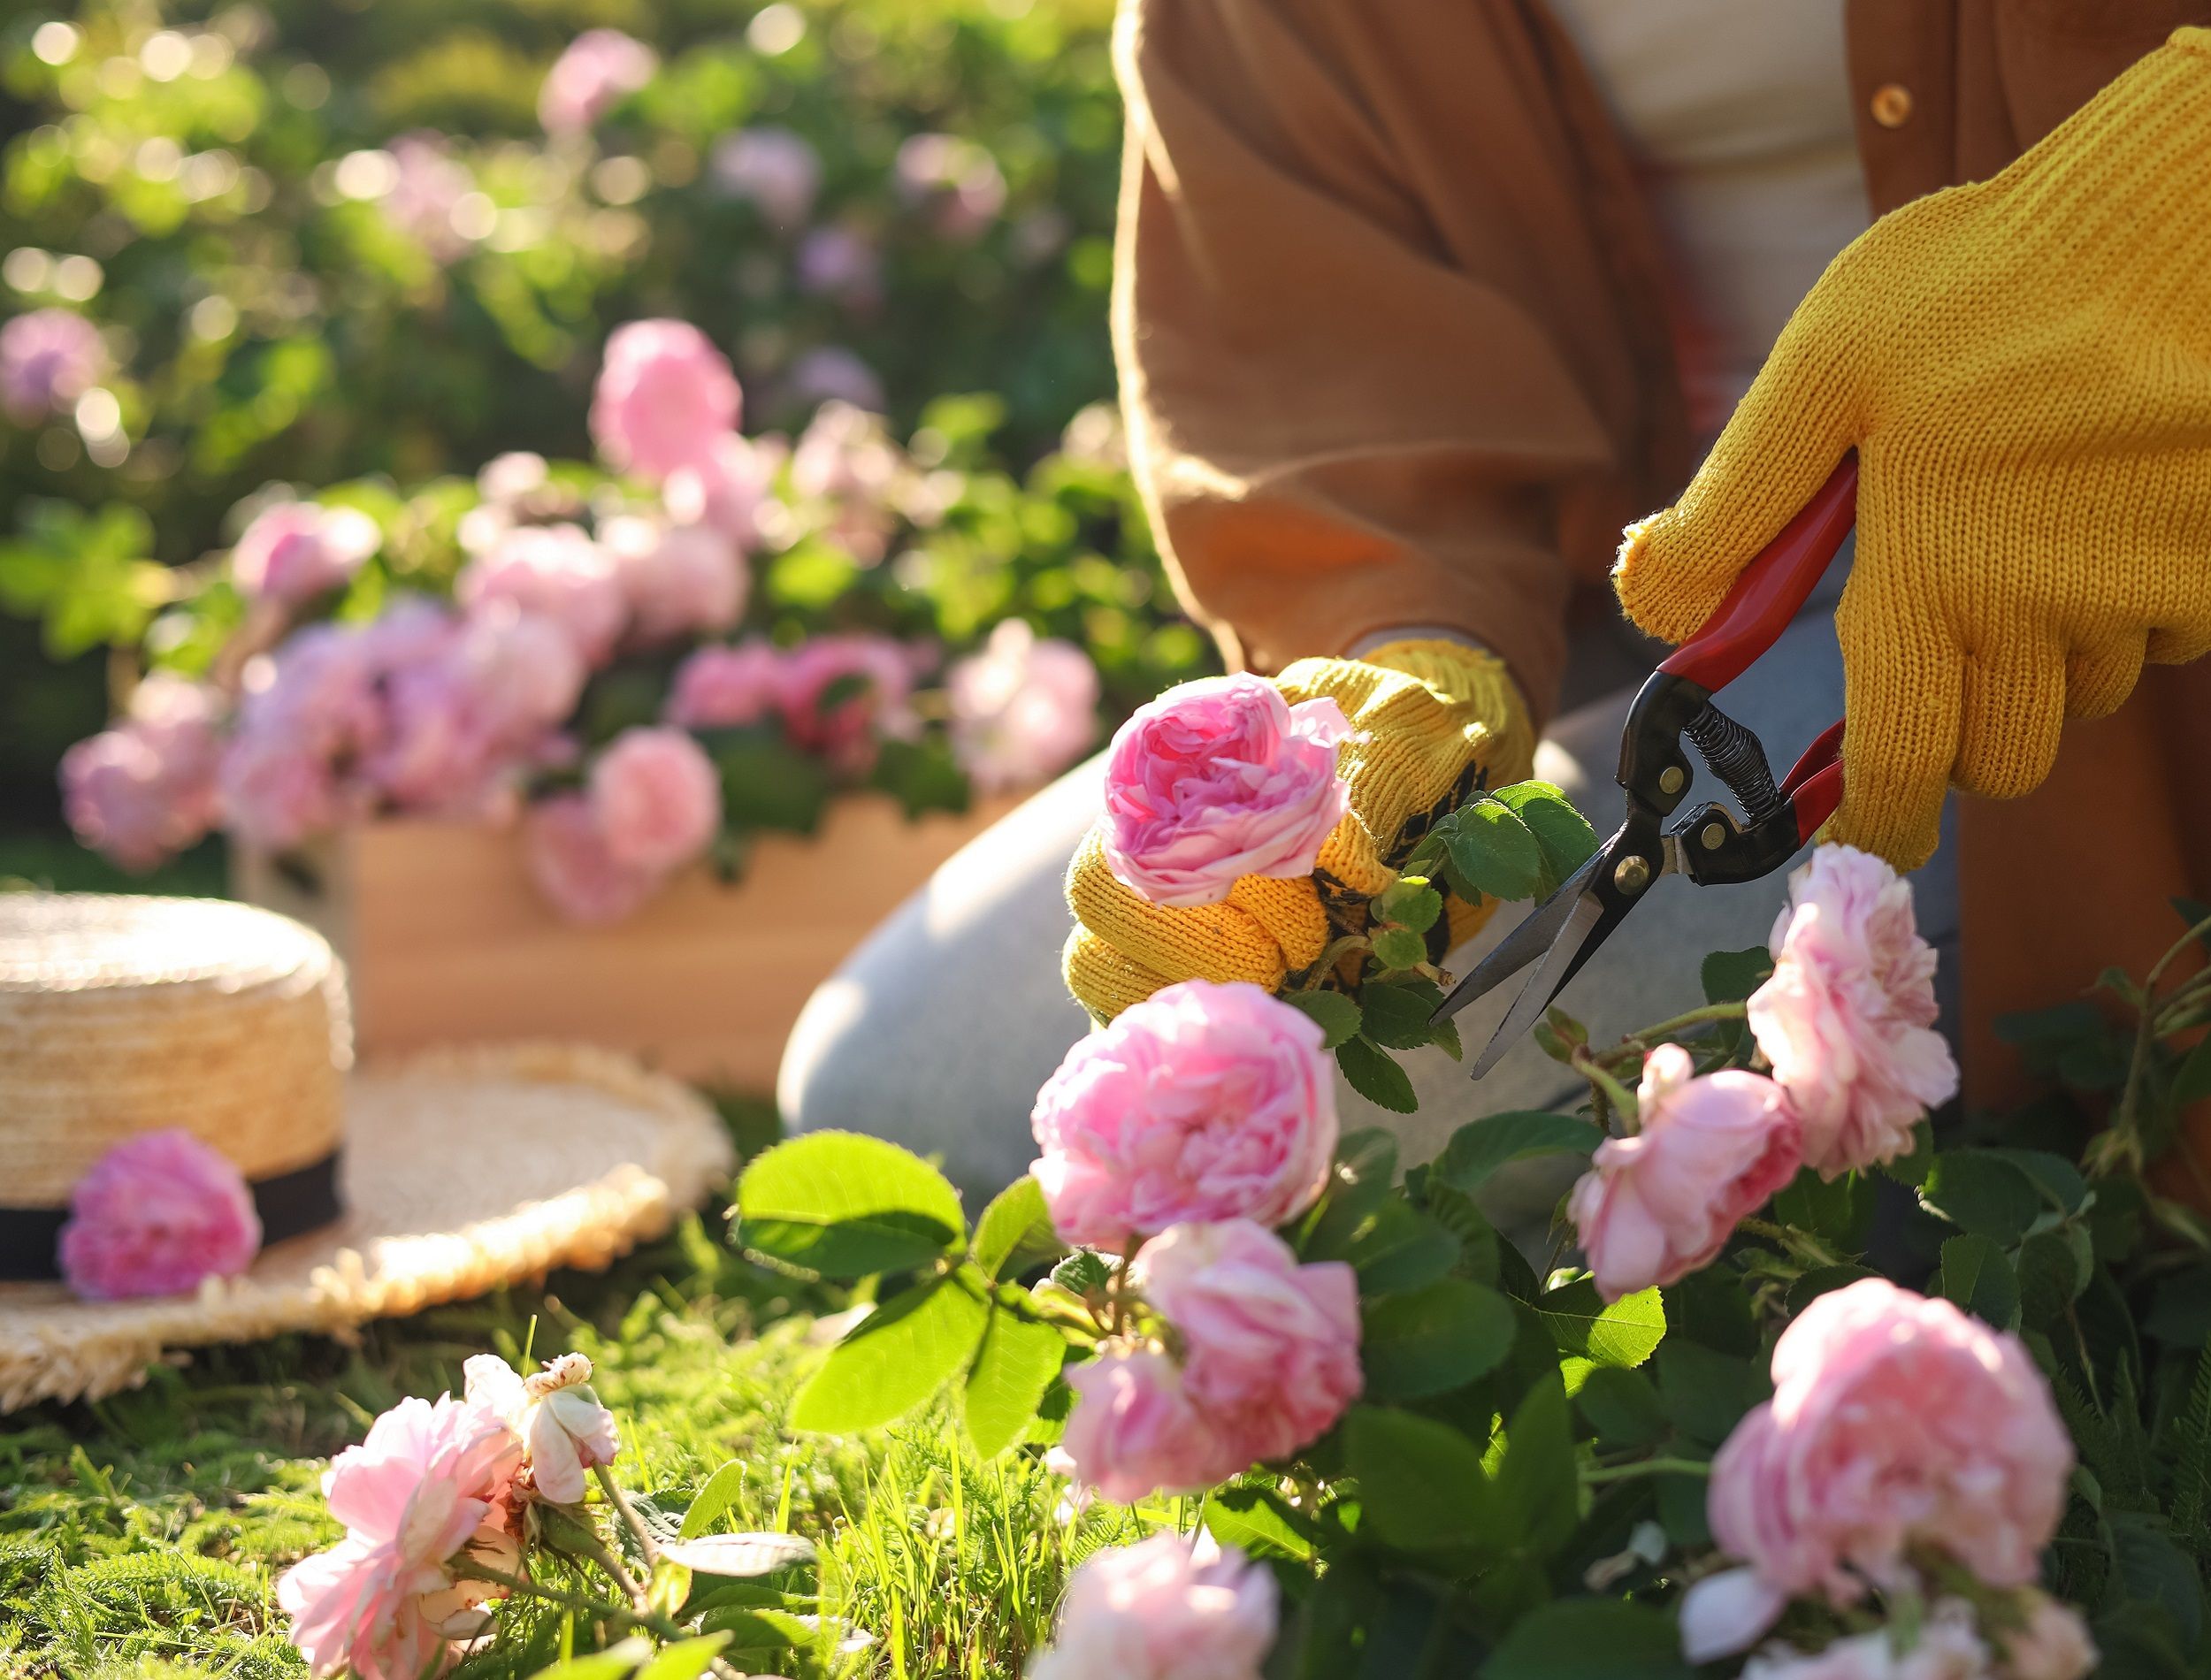 Person wearing gloves cutting roses in the garden